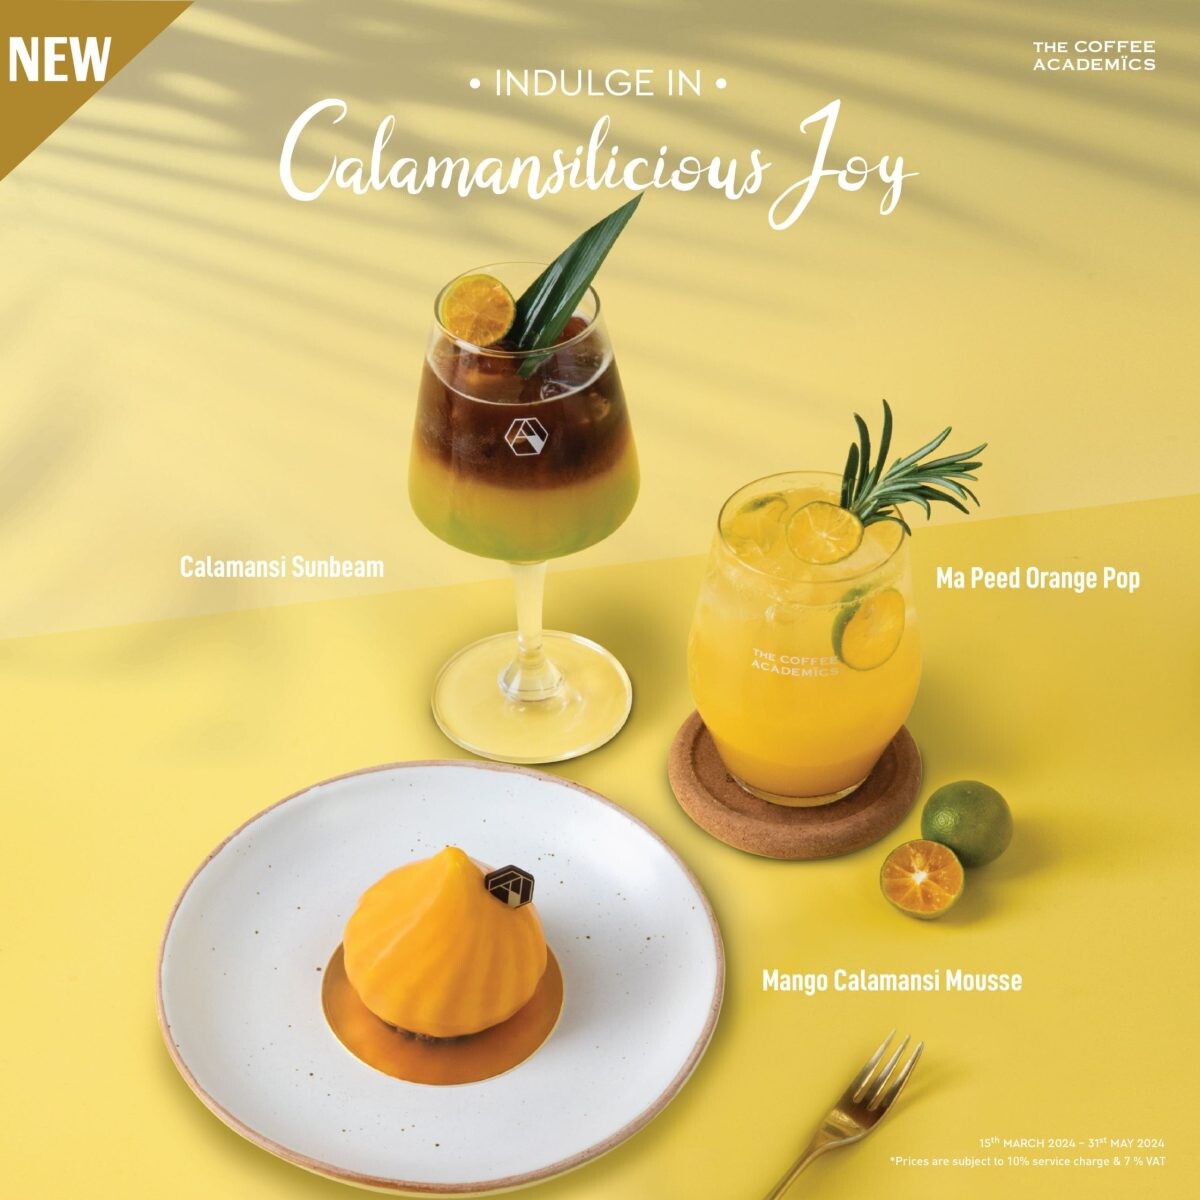 "The Coffee Academ?cs" introduces new refreshing summer menu items made from Calamansi, available from today - 31 May 2024